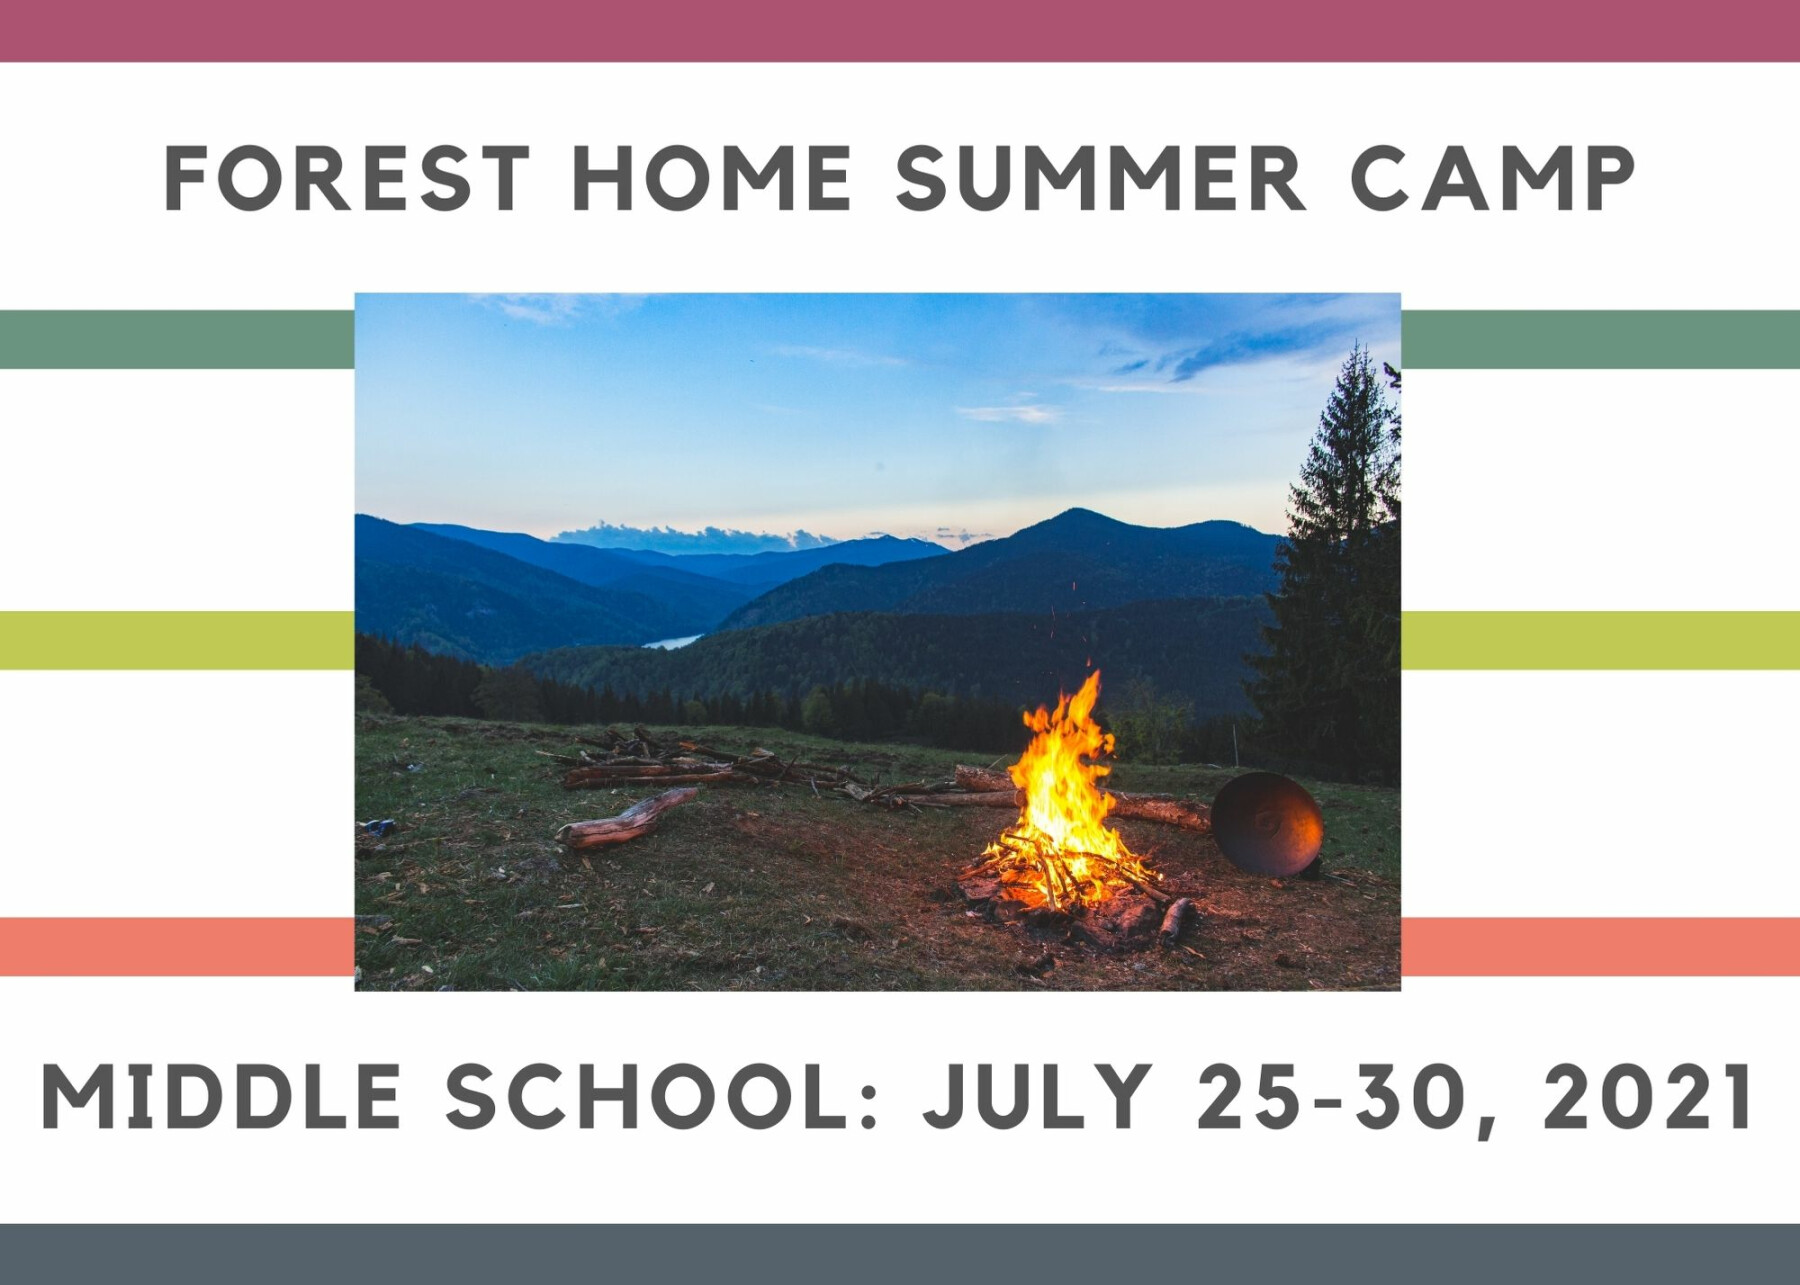 Forest Home Summer Camp, Forest Falls, CA - Middle School